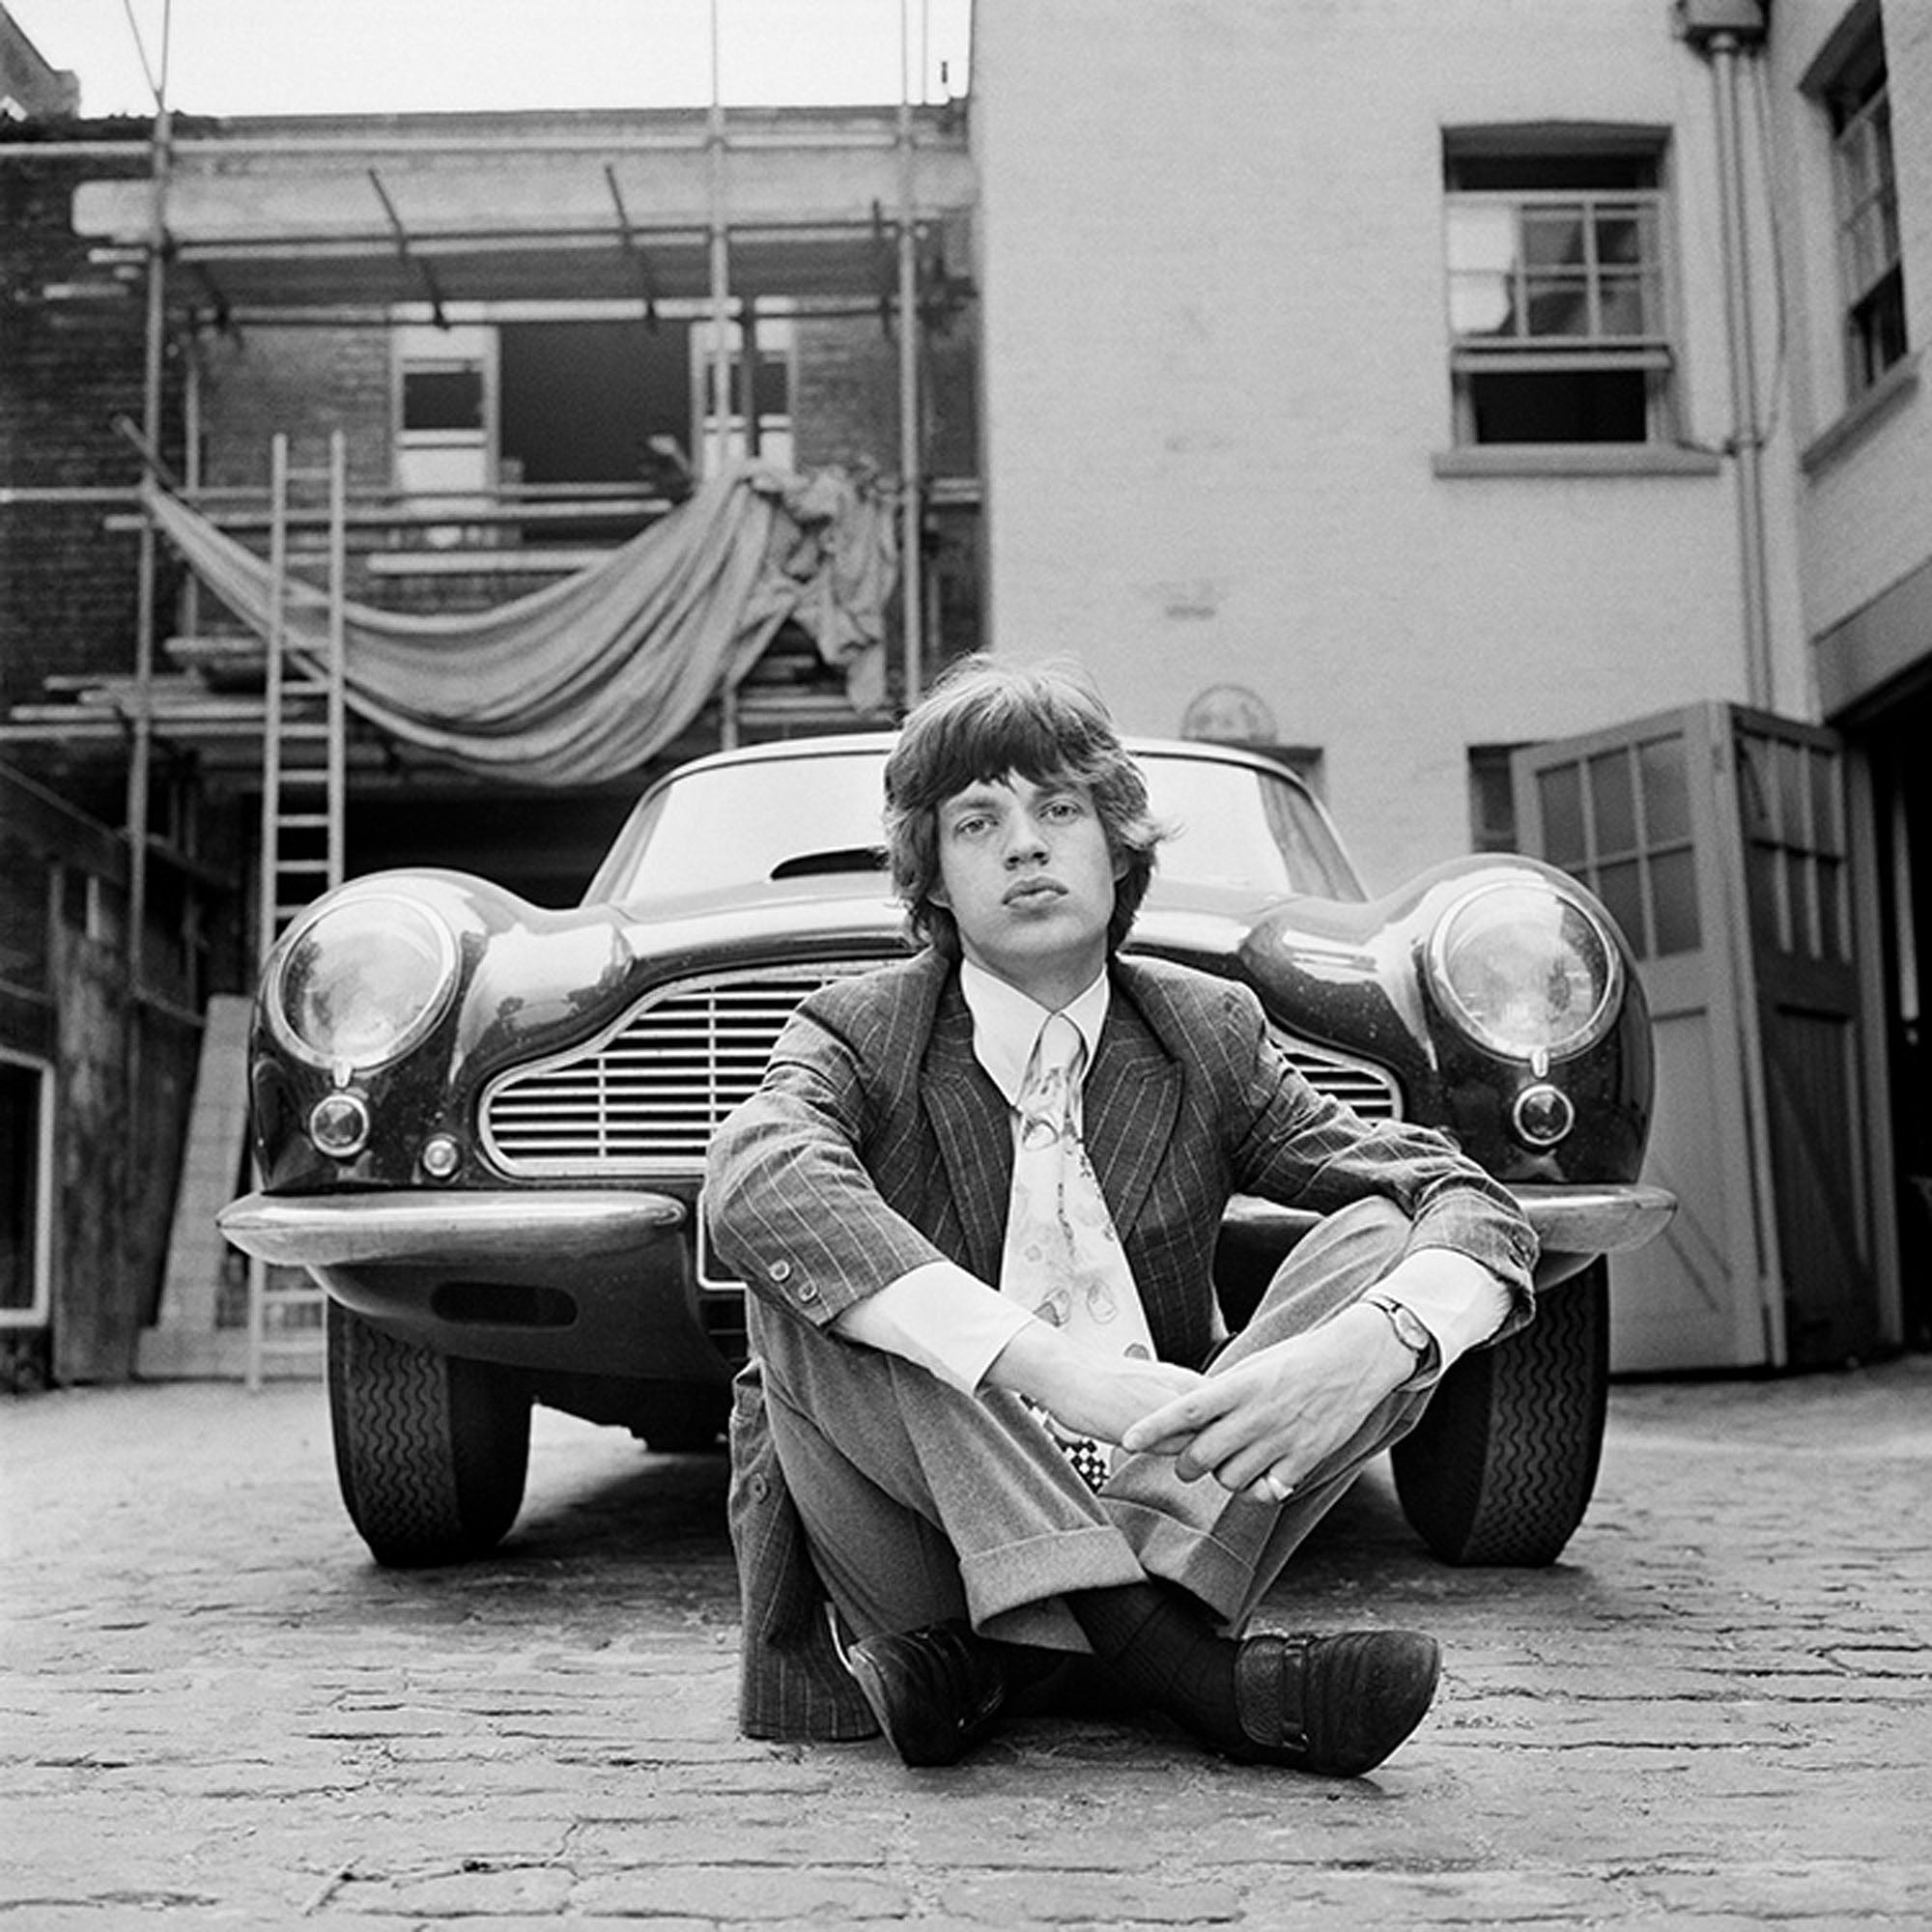 Mick Jagger photographed next to an Aston Martin DB6 car in London, 1966. - Petra Gut Contemporary AG Gered Mankowitz